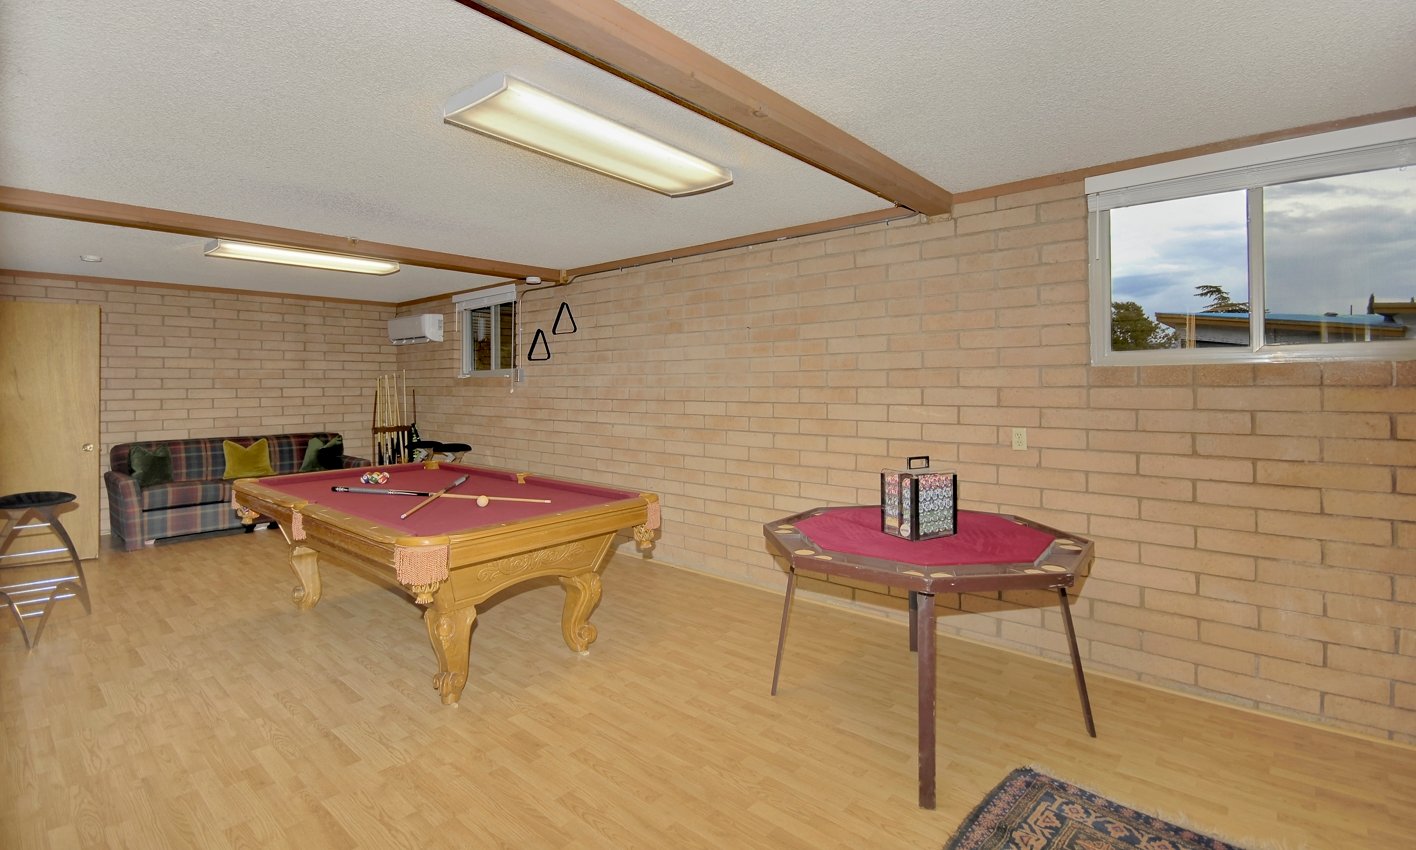 Downstairs game room with billiards and poker tables